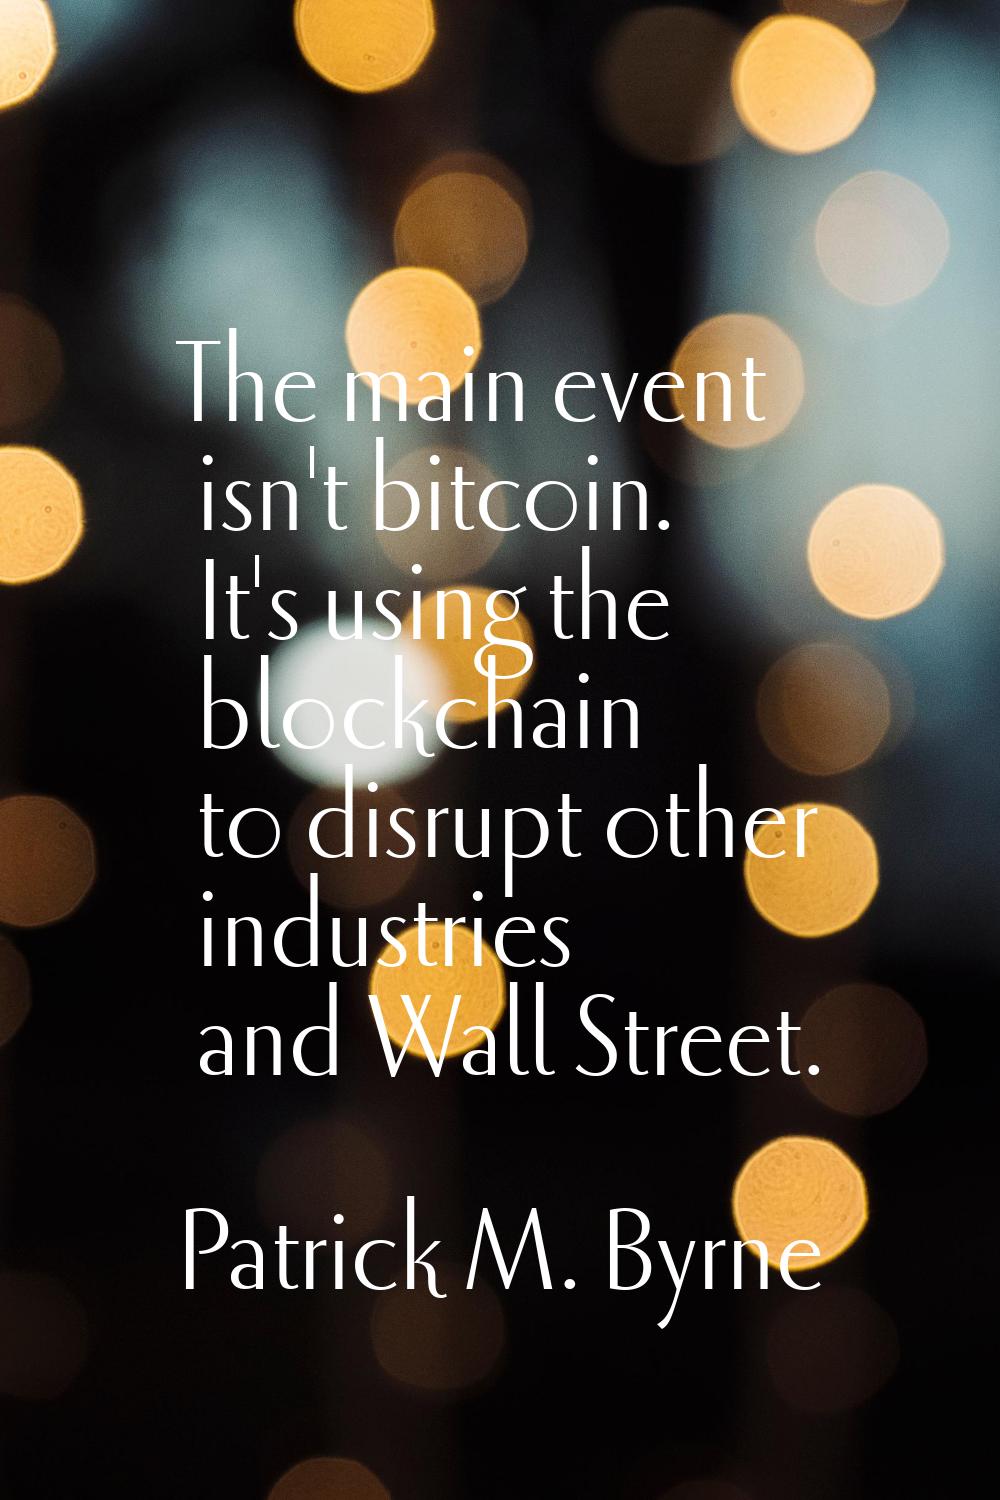 The main event isn't bitcoin. It's using the blockchain to disrupt other industries and Wall Street